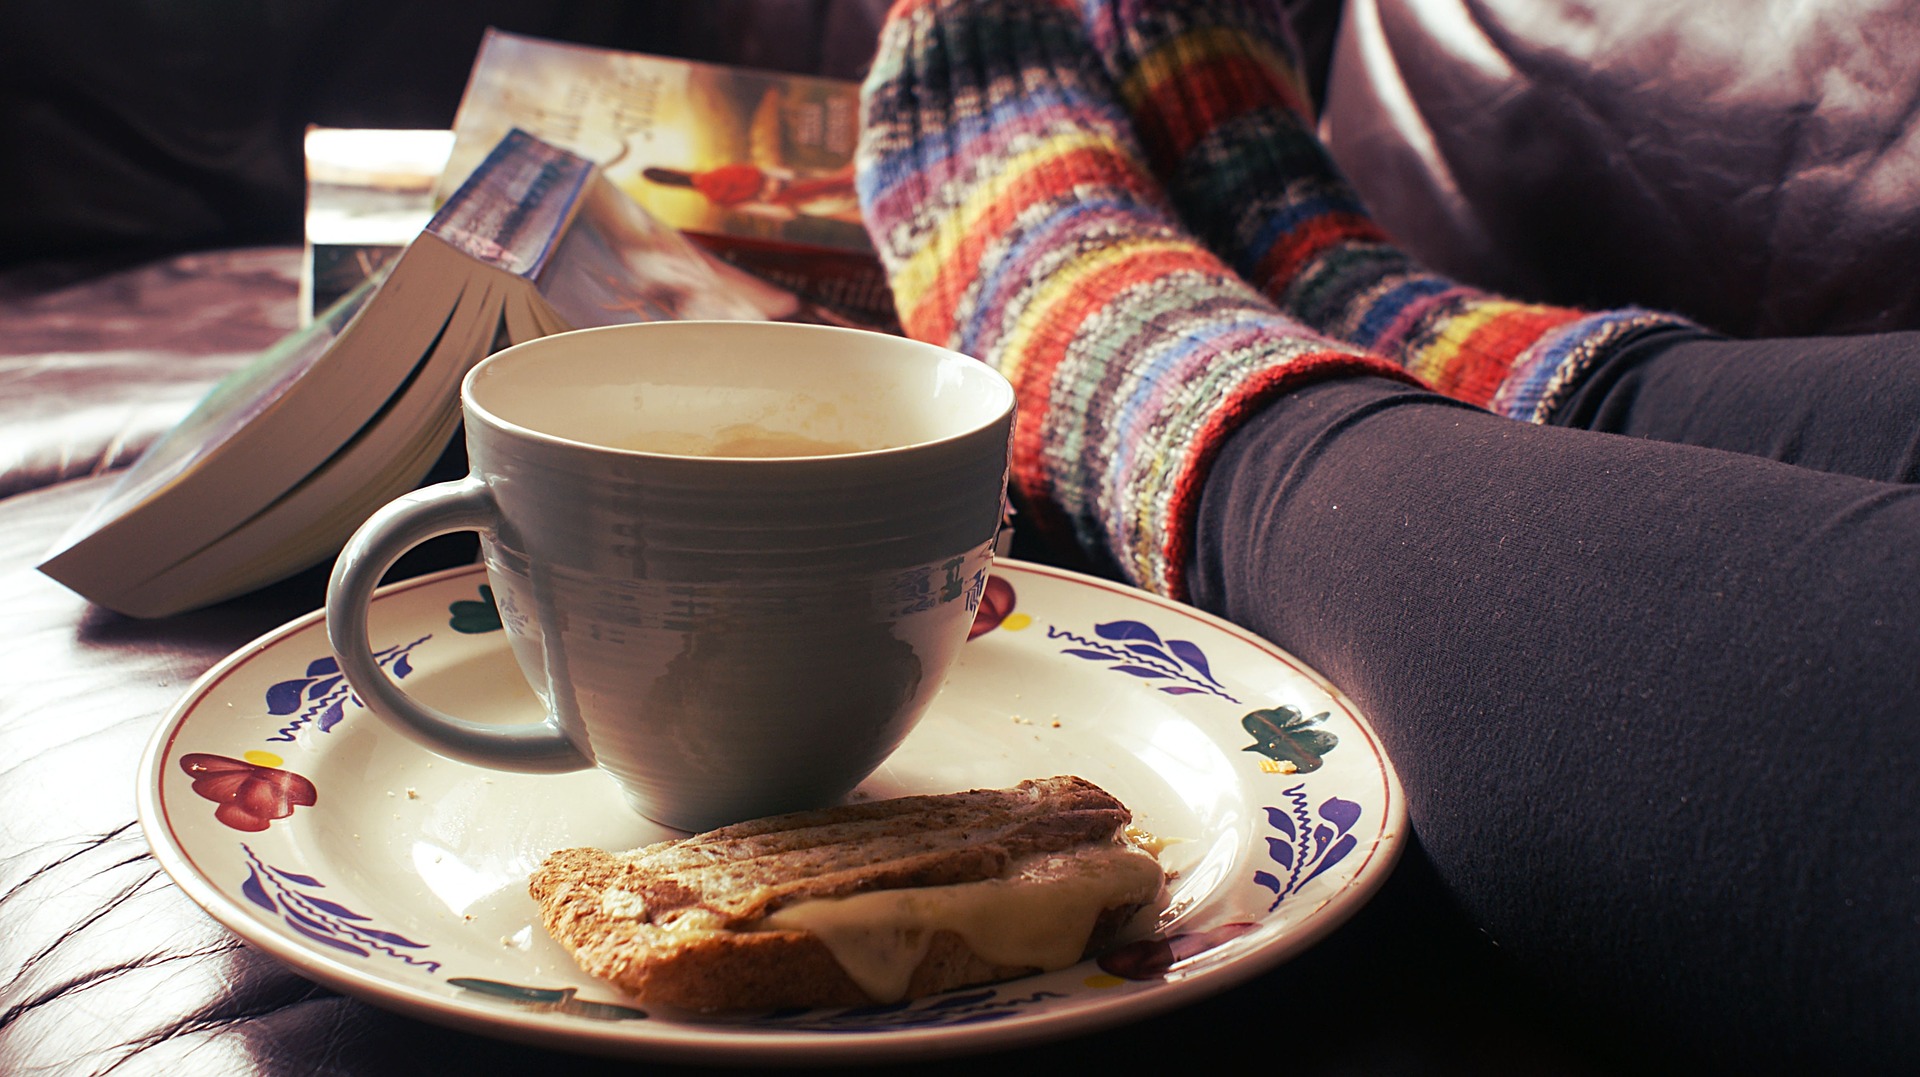 Close up of a tea cup with a cake on the saucer, and a woman's feet up relaxing